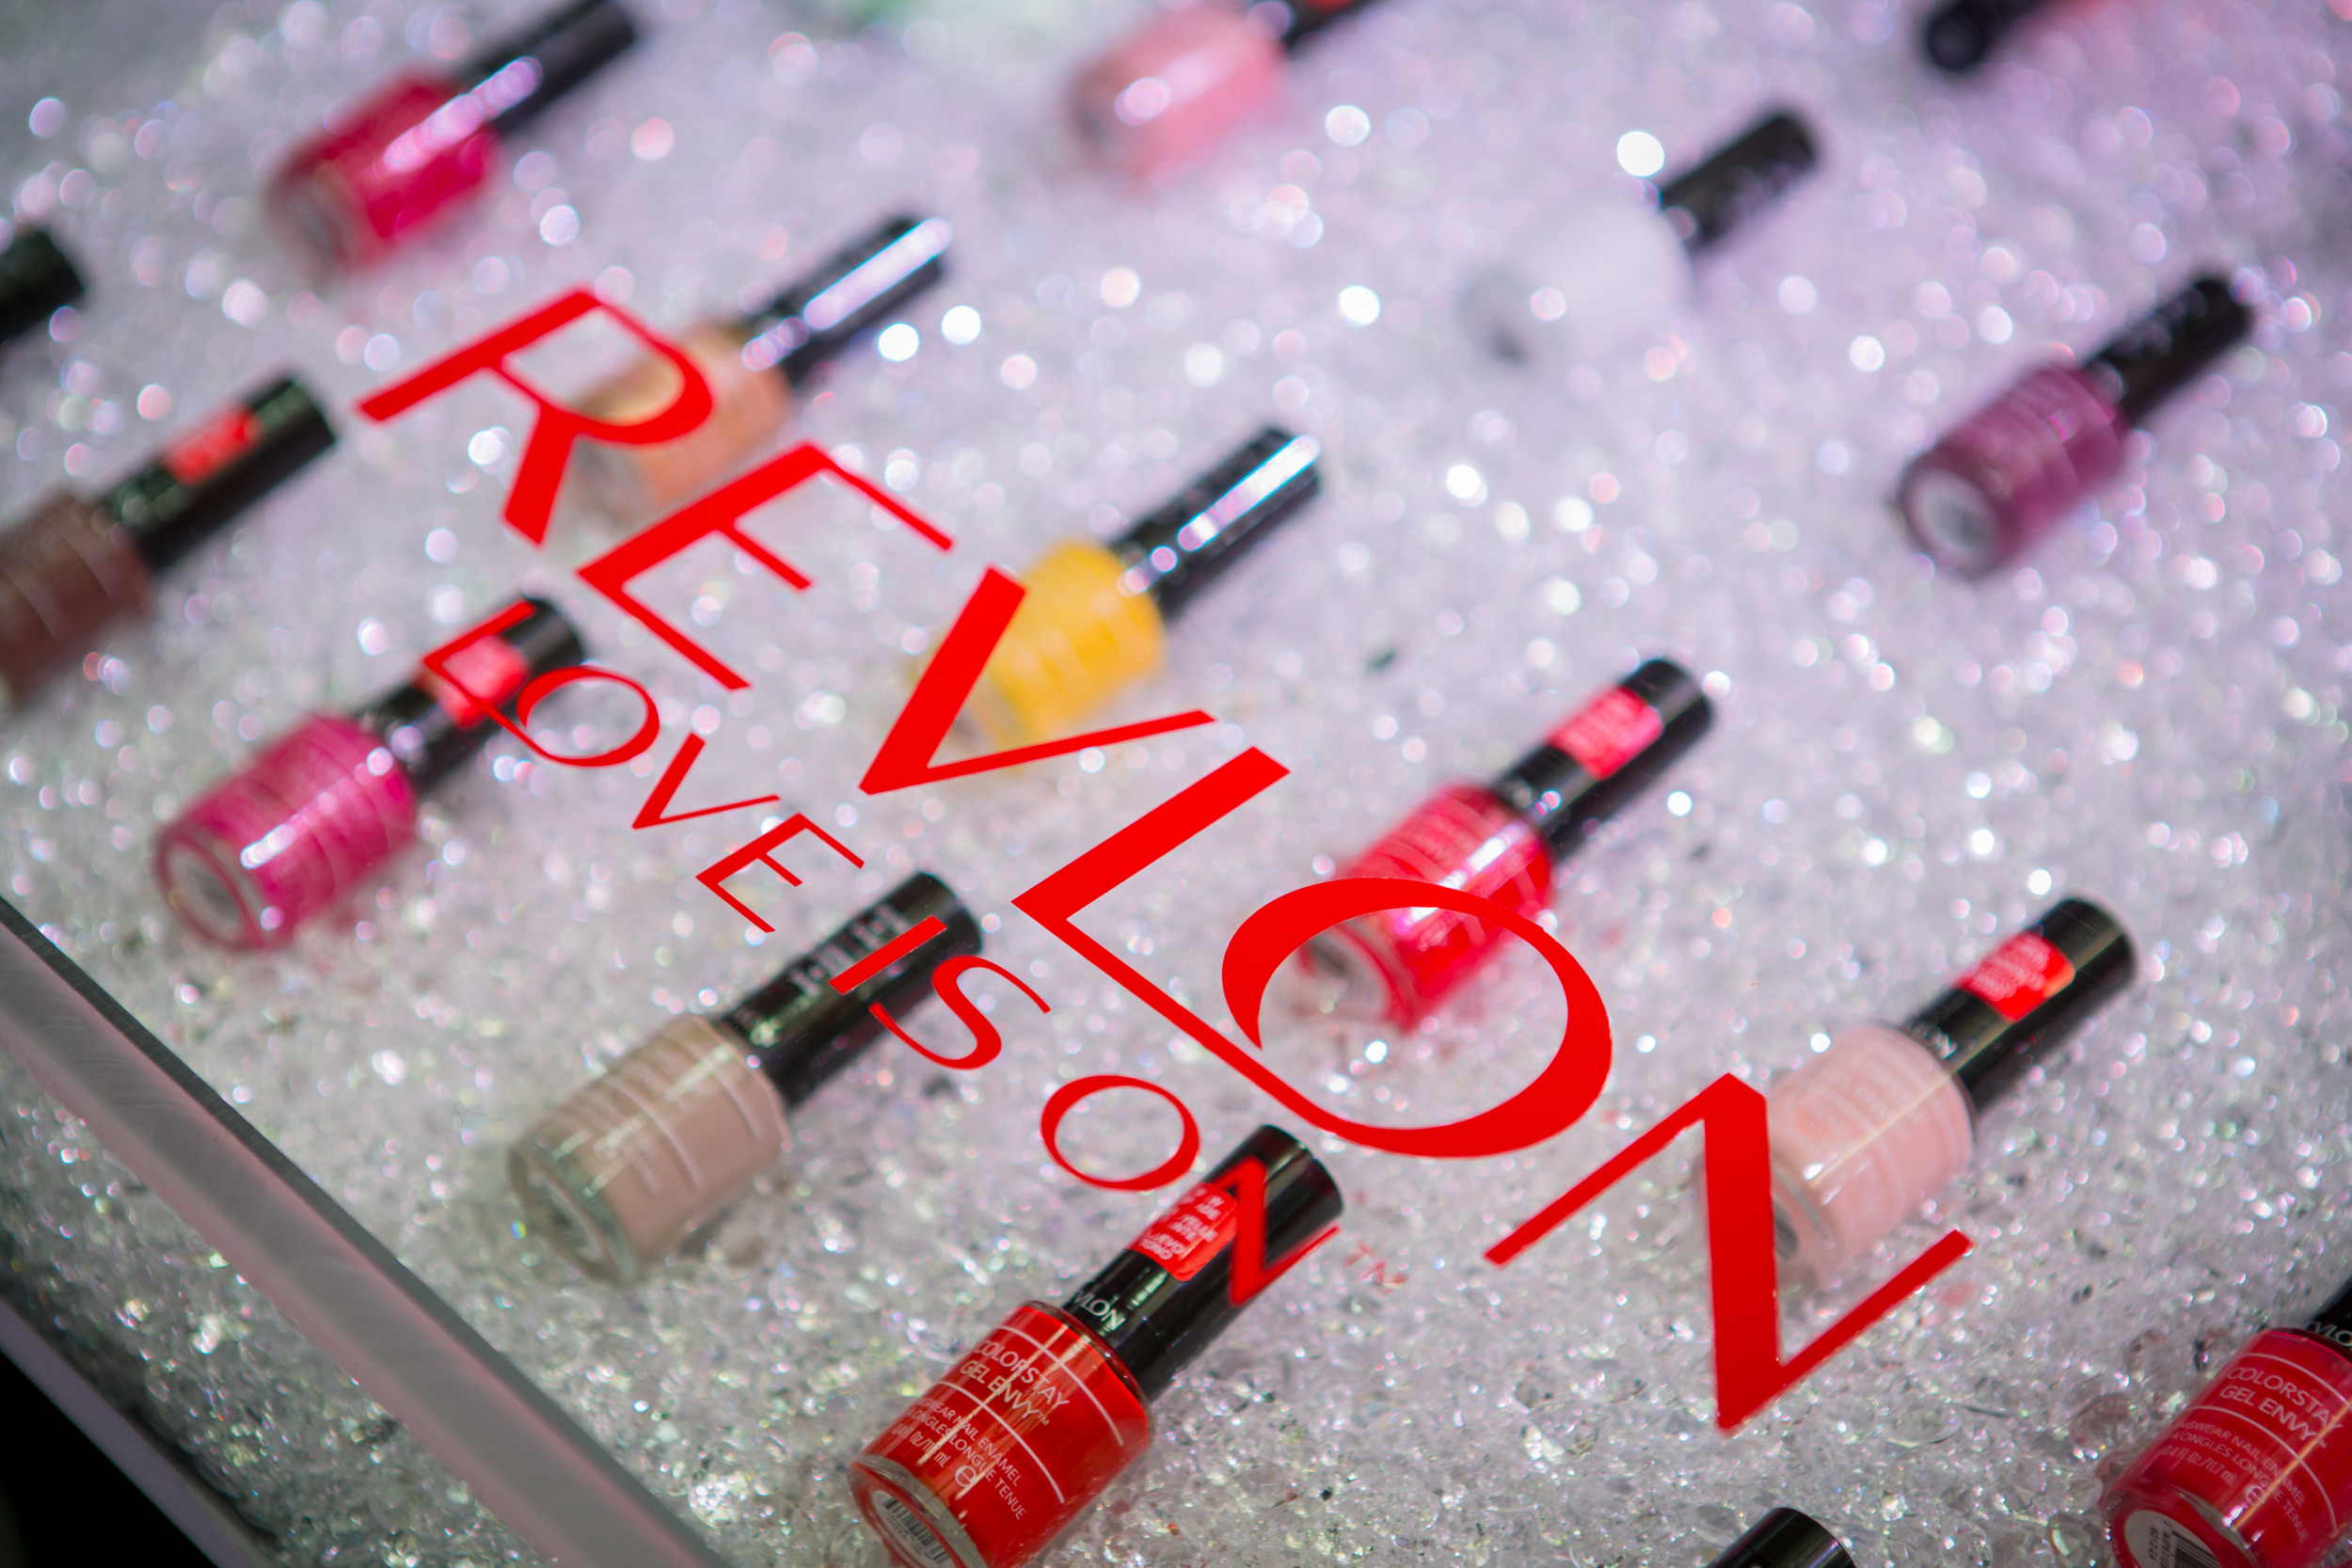 Revlon Love is On! trade show activation at Beauty Con